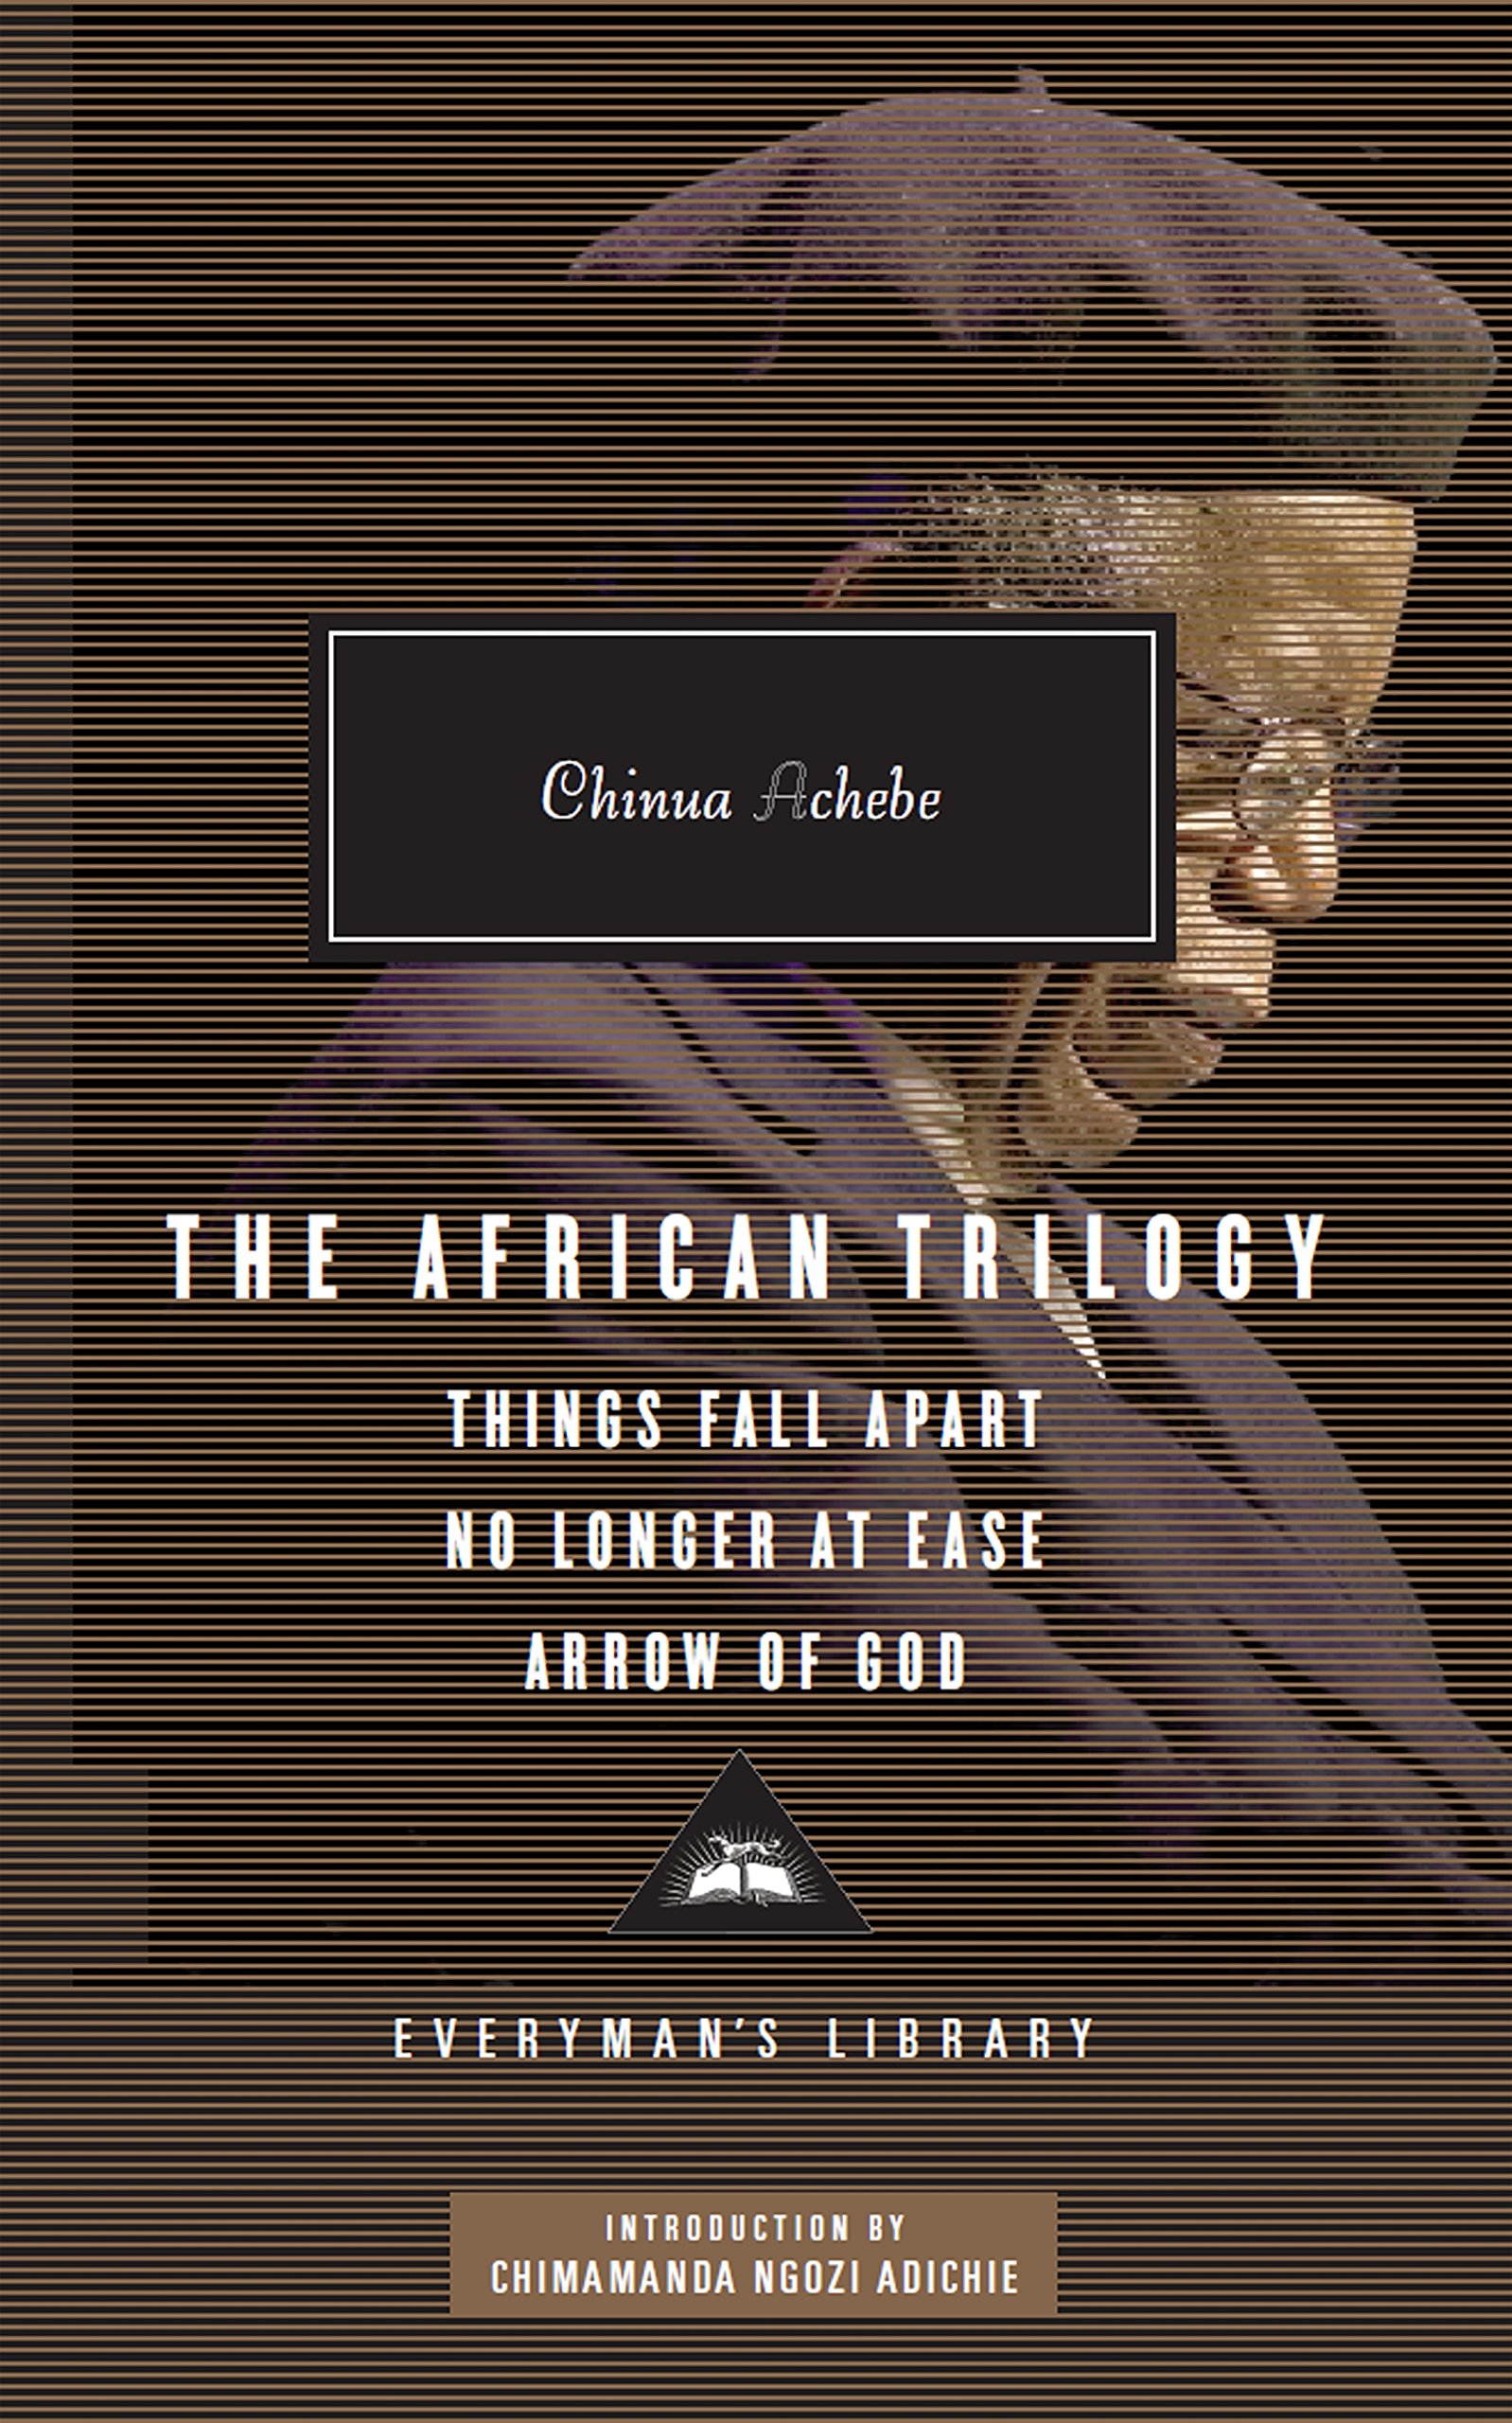 The African Trilogy: Things Fall Apart / No Longer at Ease / Arrow of God